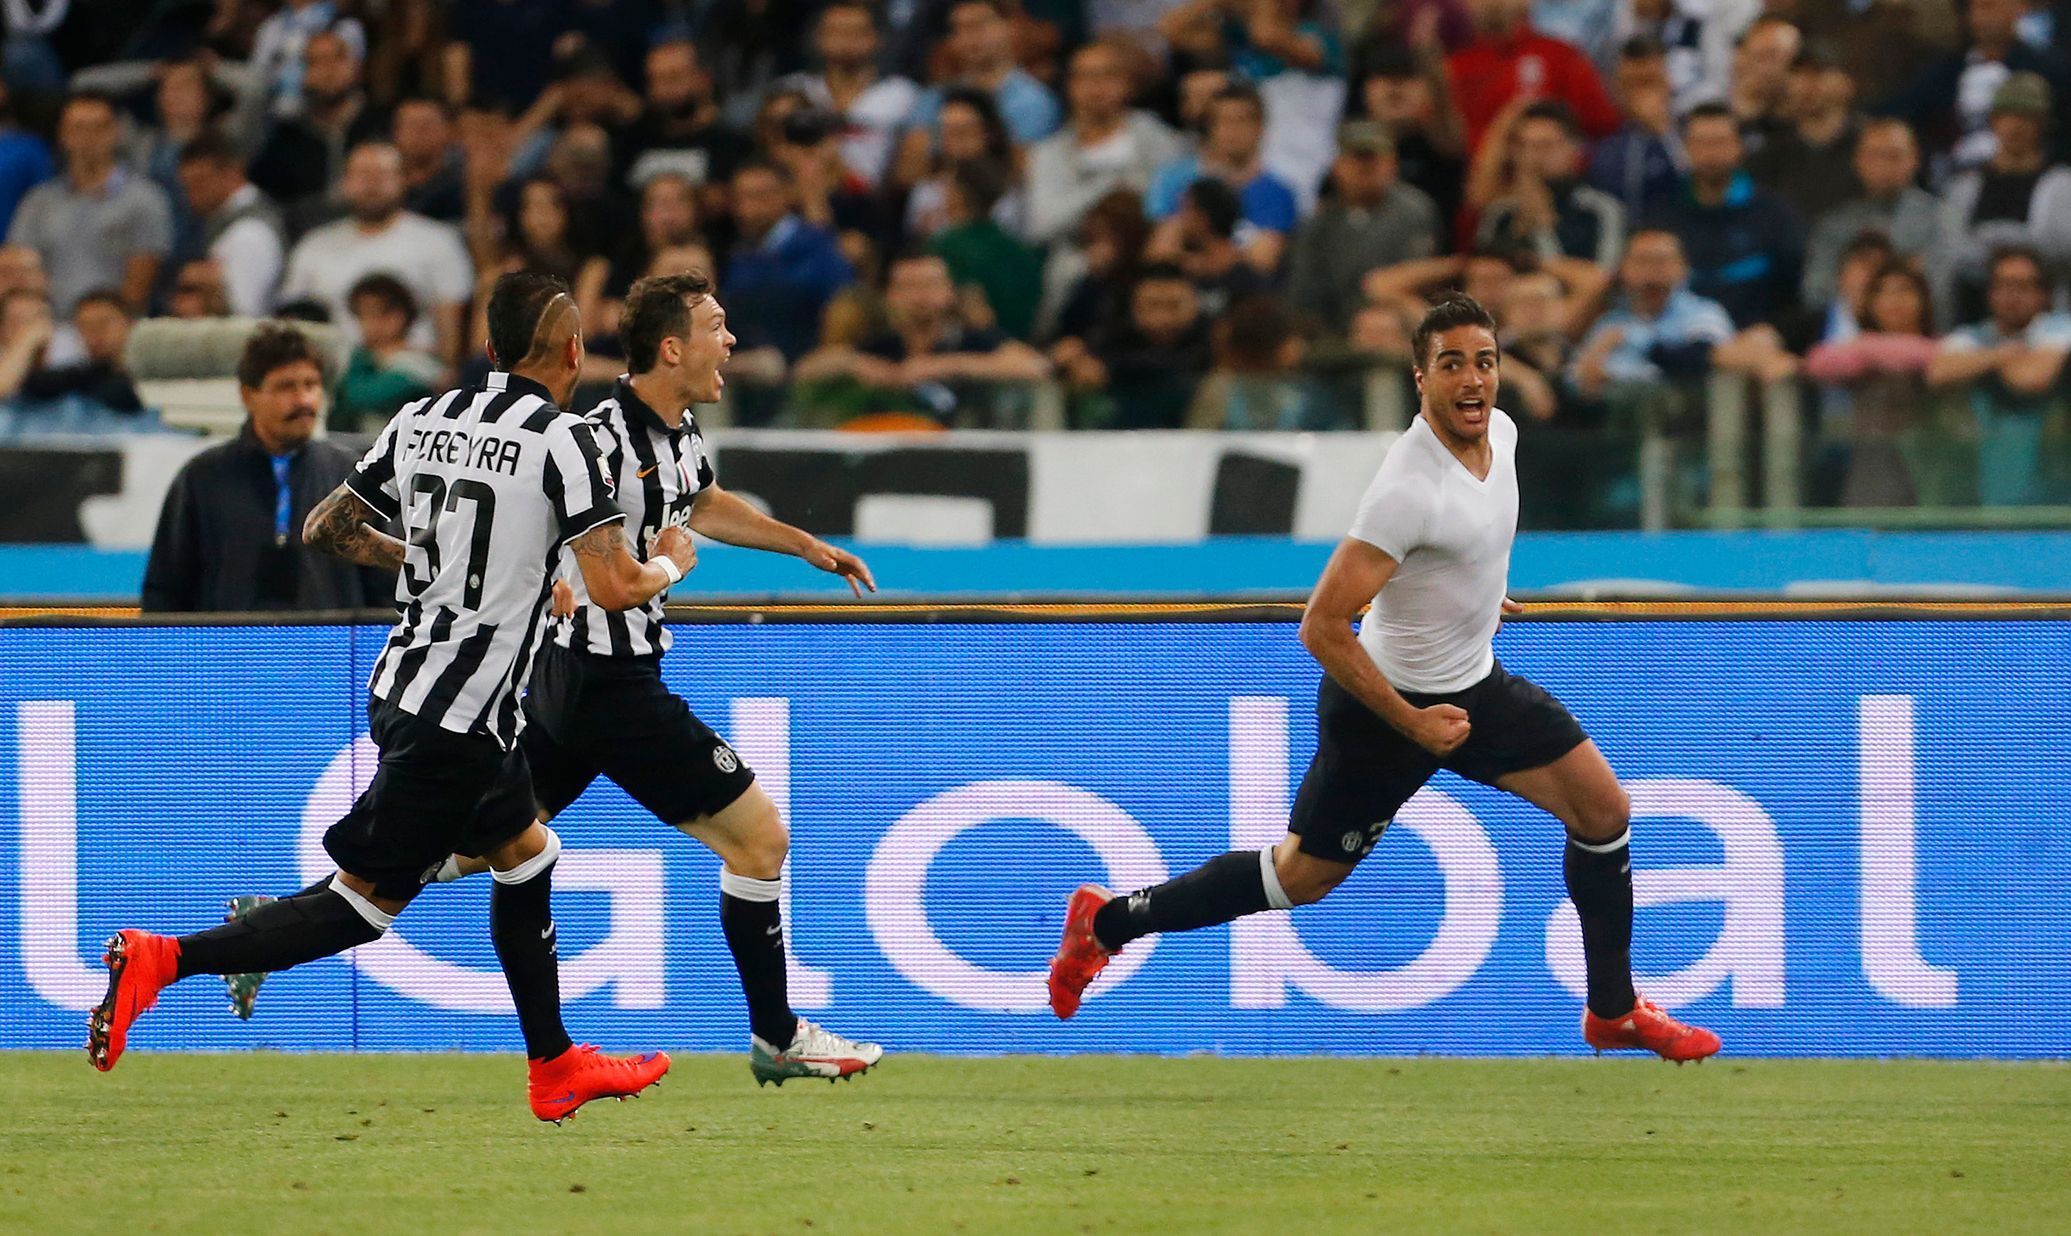 Football: Alessandro Matri celebrates after scoring the second goal for Juventus